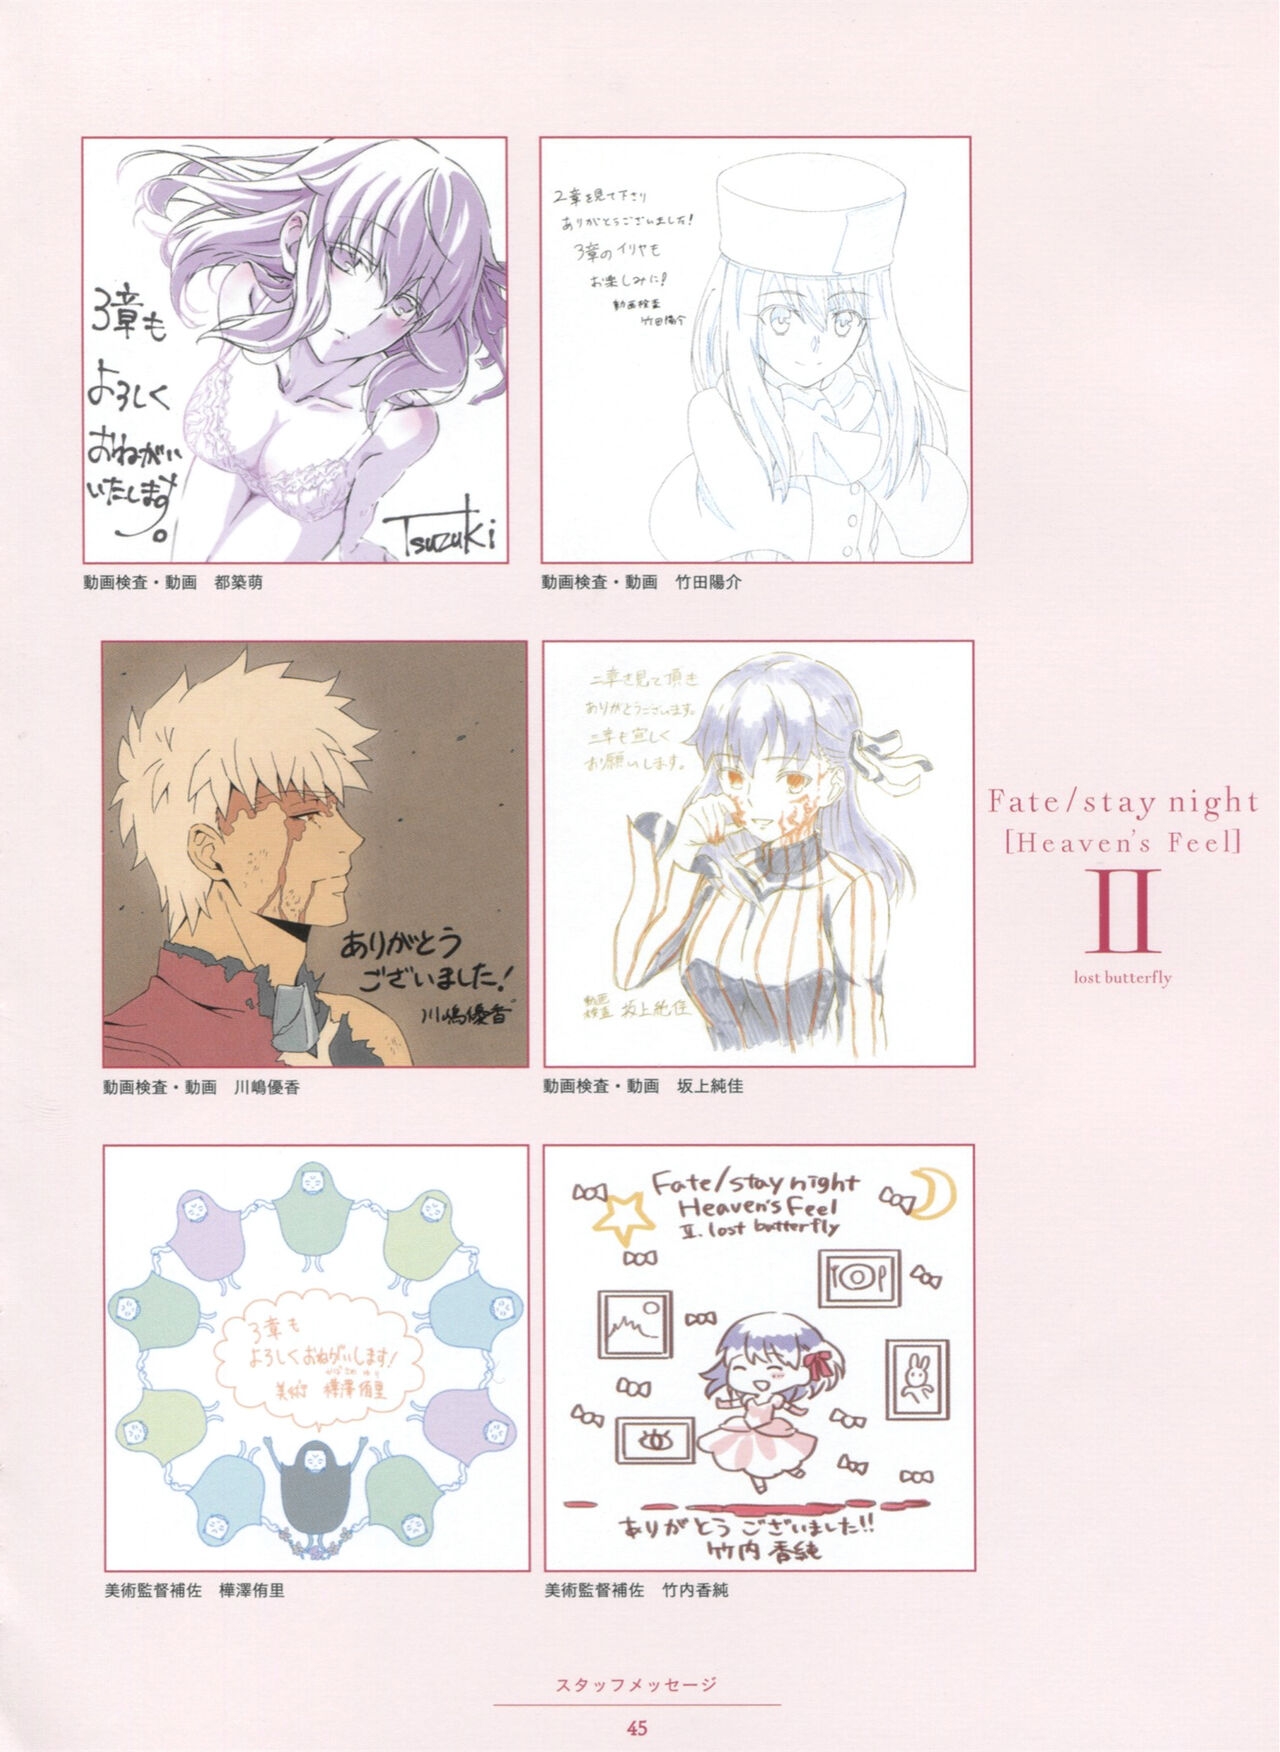 Fate/Stay Night: Heaven's Feel II - Lost Butterfly Animation Material 44